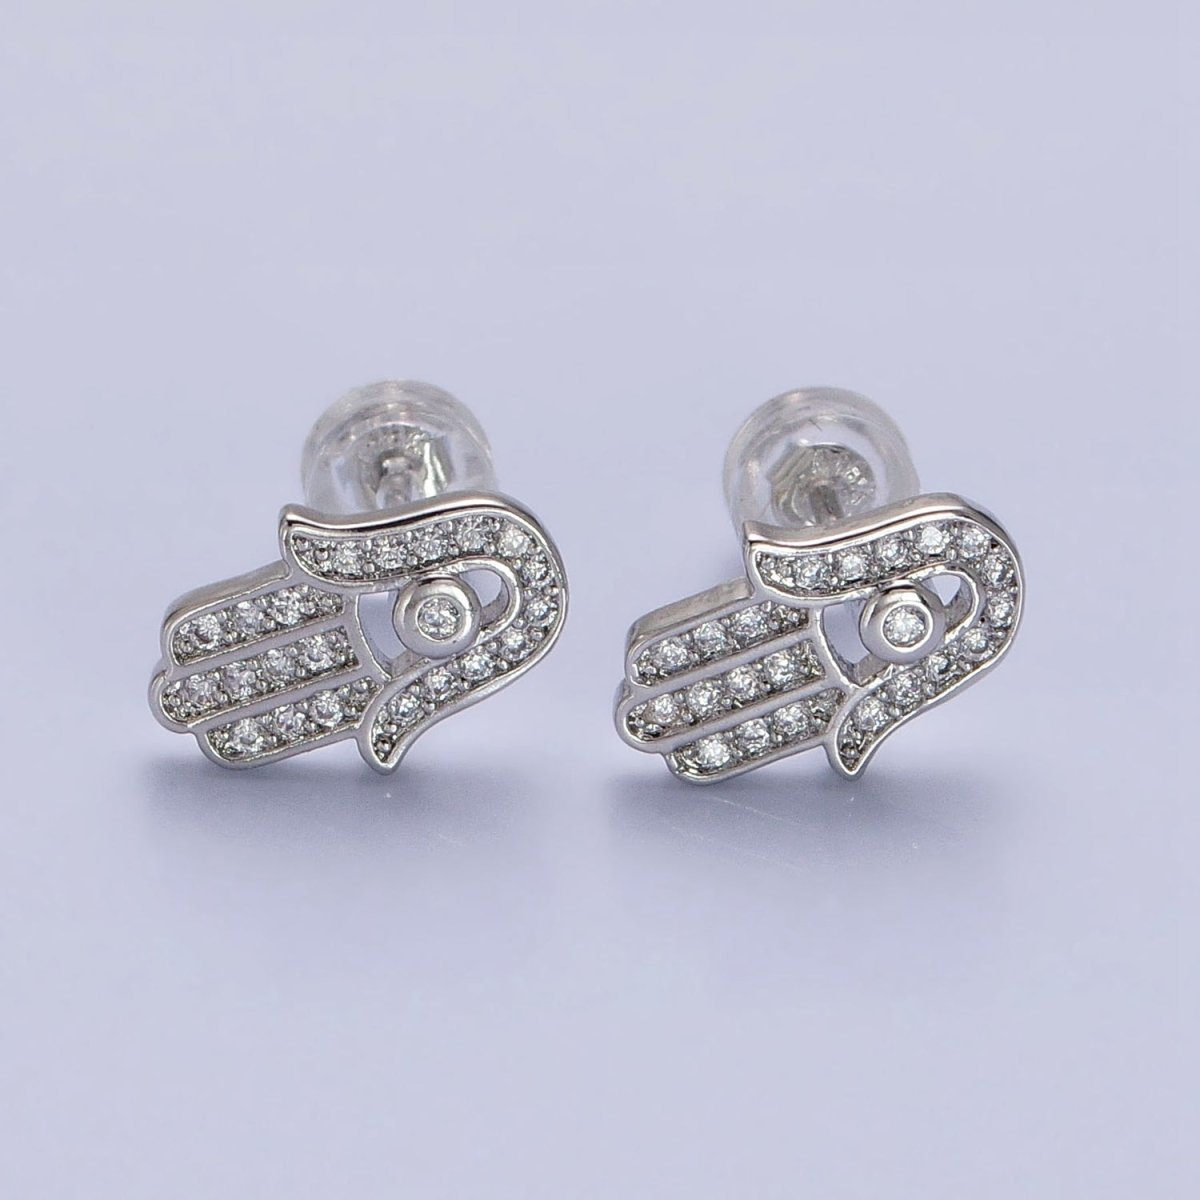 Gold, Silver Micro Paved Clear CZ Protection Hamsa Hand Evil Eye Stud Earrings | AB1012 AB1013 - DLUXCA